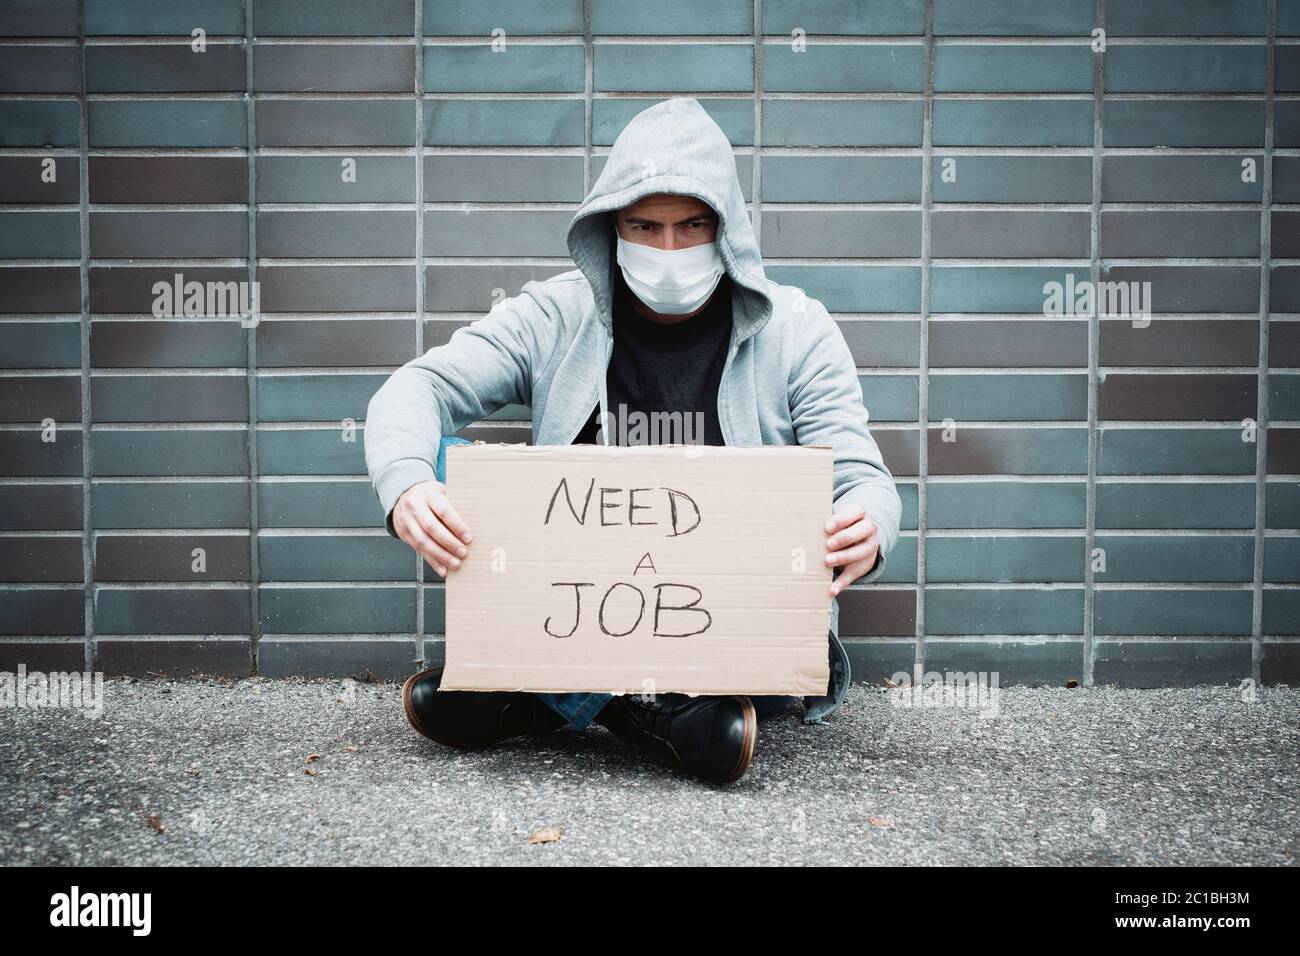 Jobless guy looking for a job and begging in the streets during covid-19 recession Stock Photo